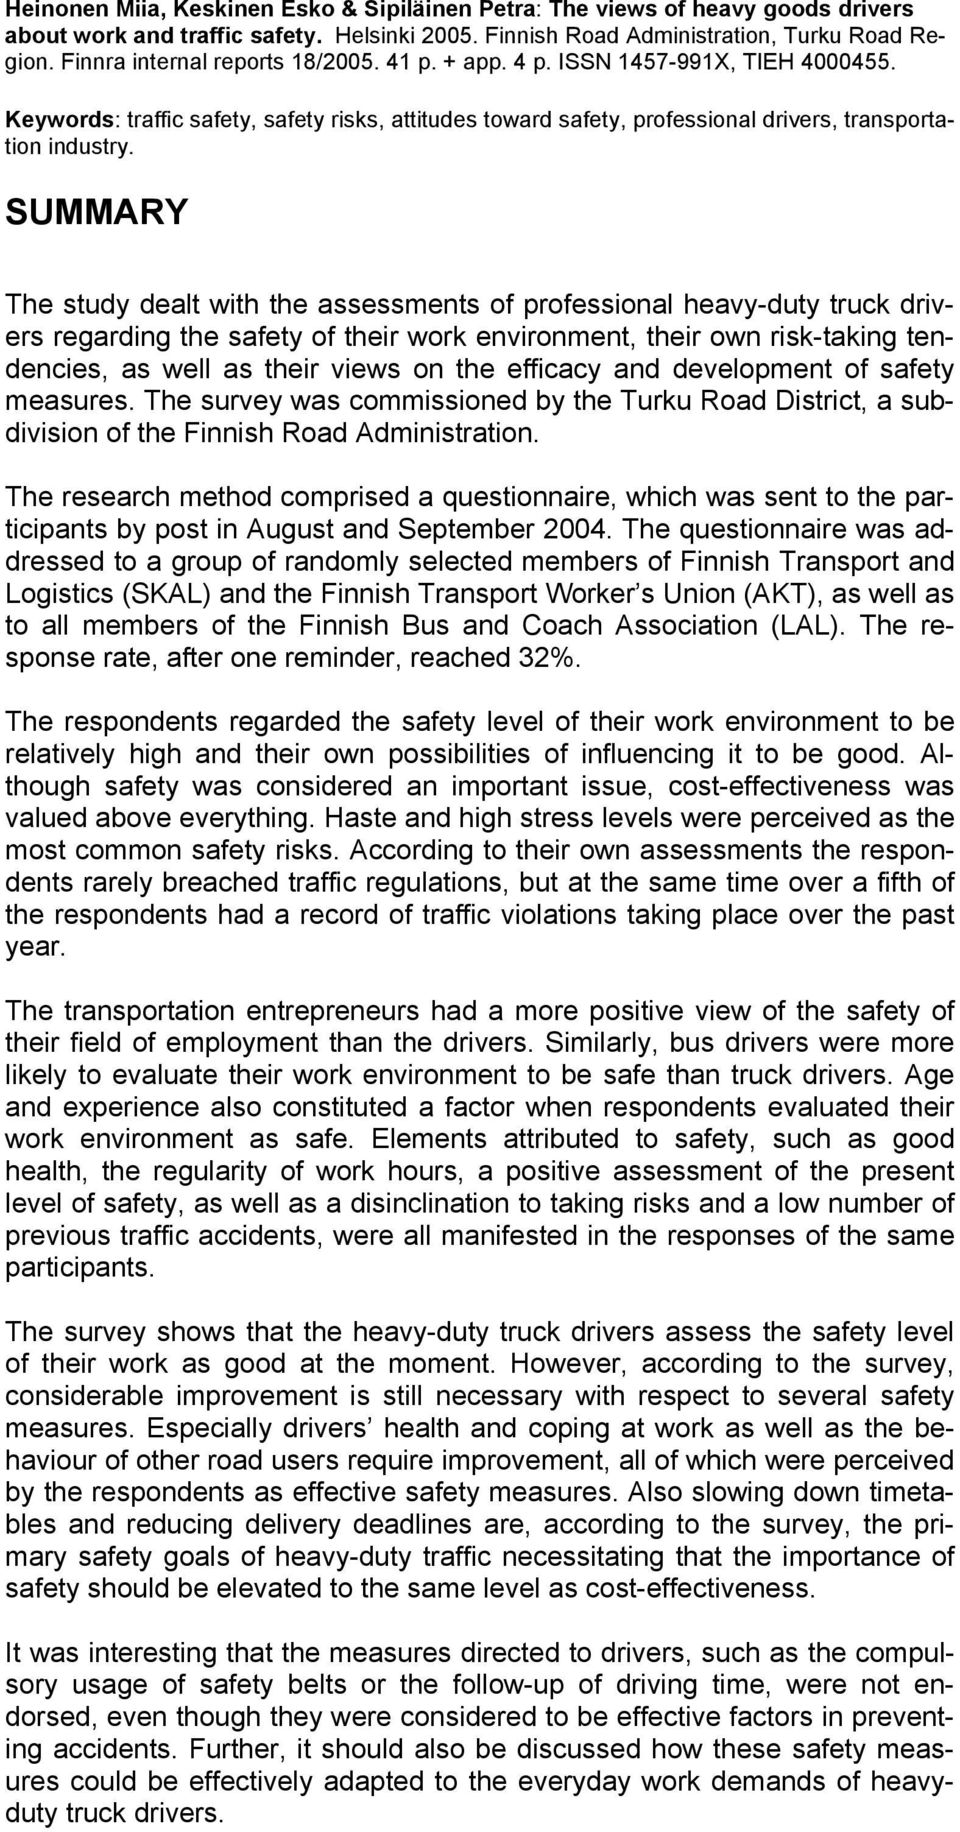 SUMMARY The study dealt with the assessments of professional heavy-duty truck drivers regarding the safety of their work environment, their own risk-taking tendencies, as well as their views on the